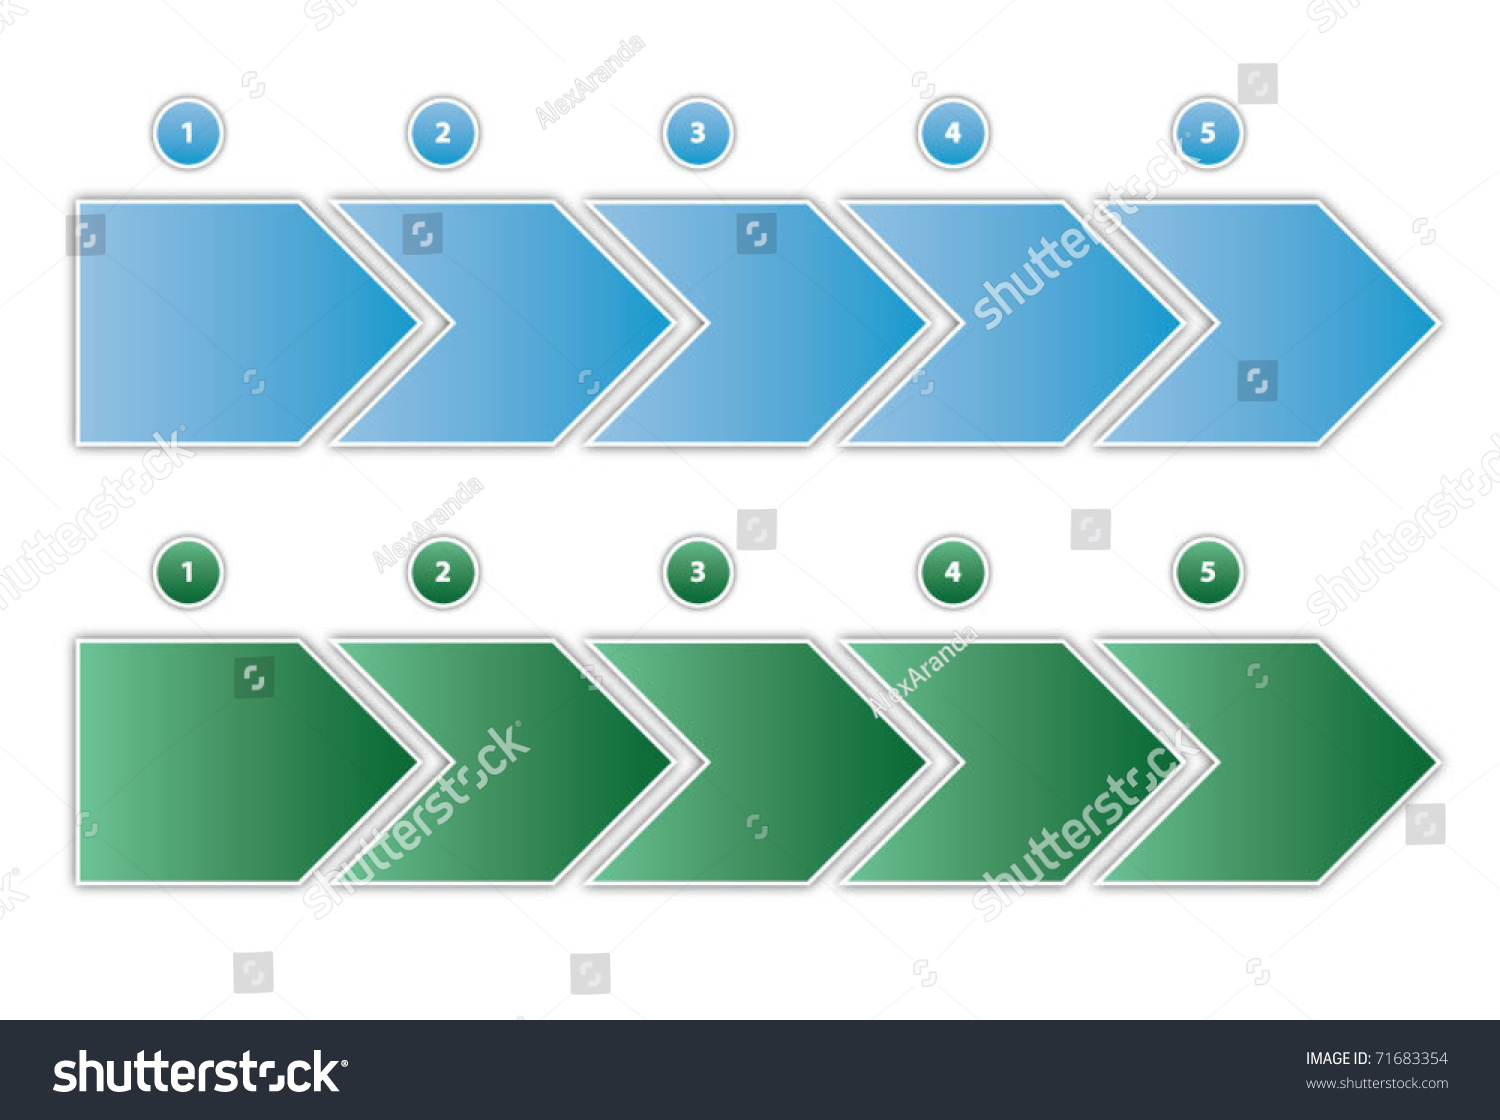 Business Process Diagram Phases Stock Vector (Royalty Free) 71683354